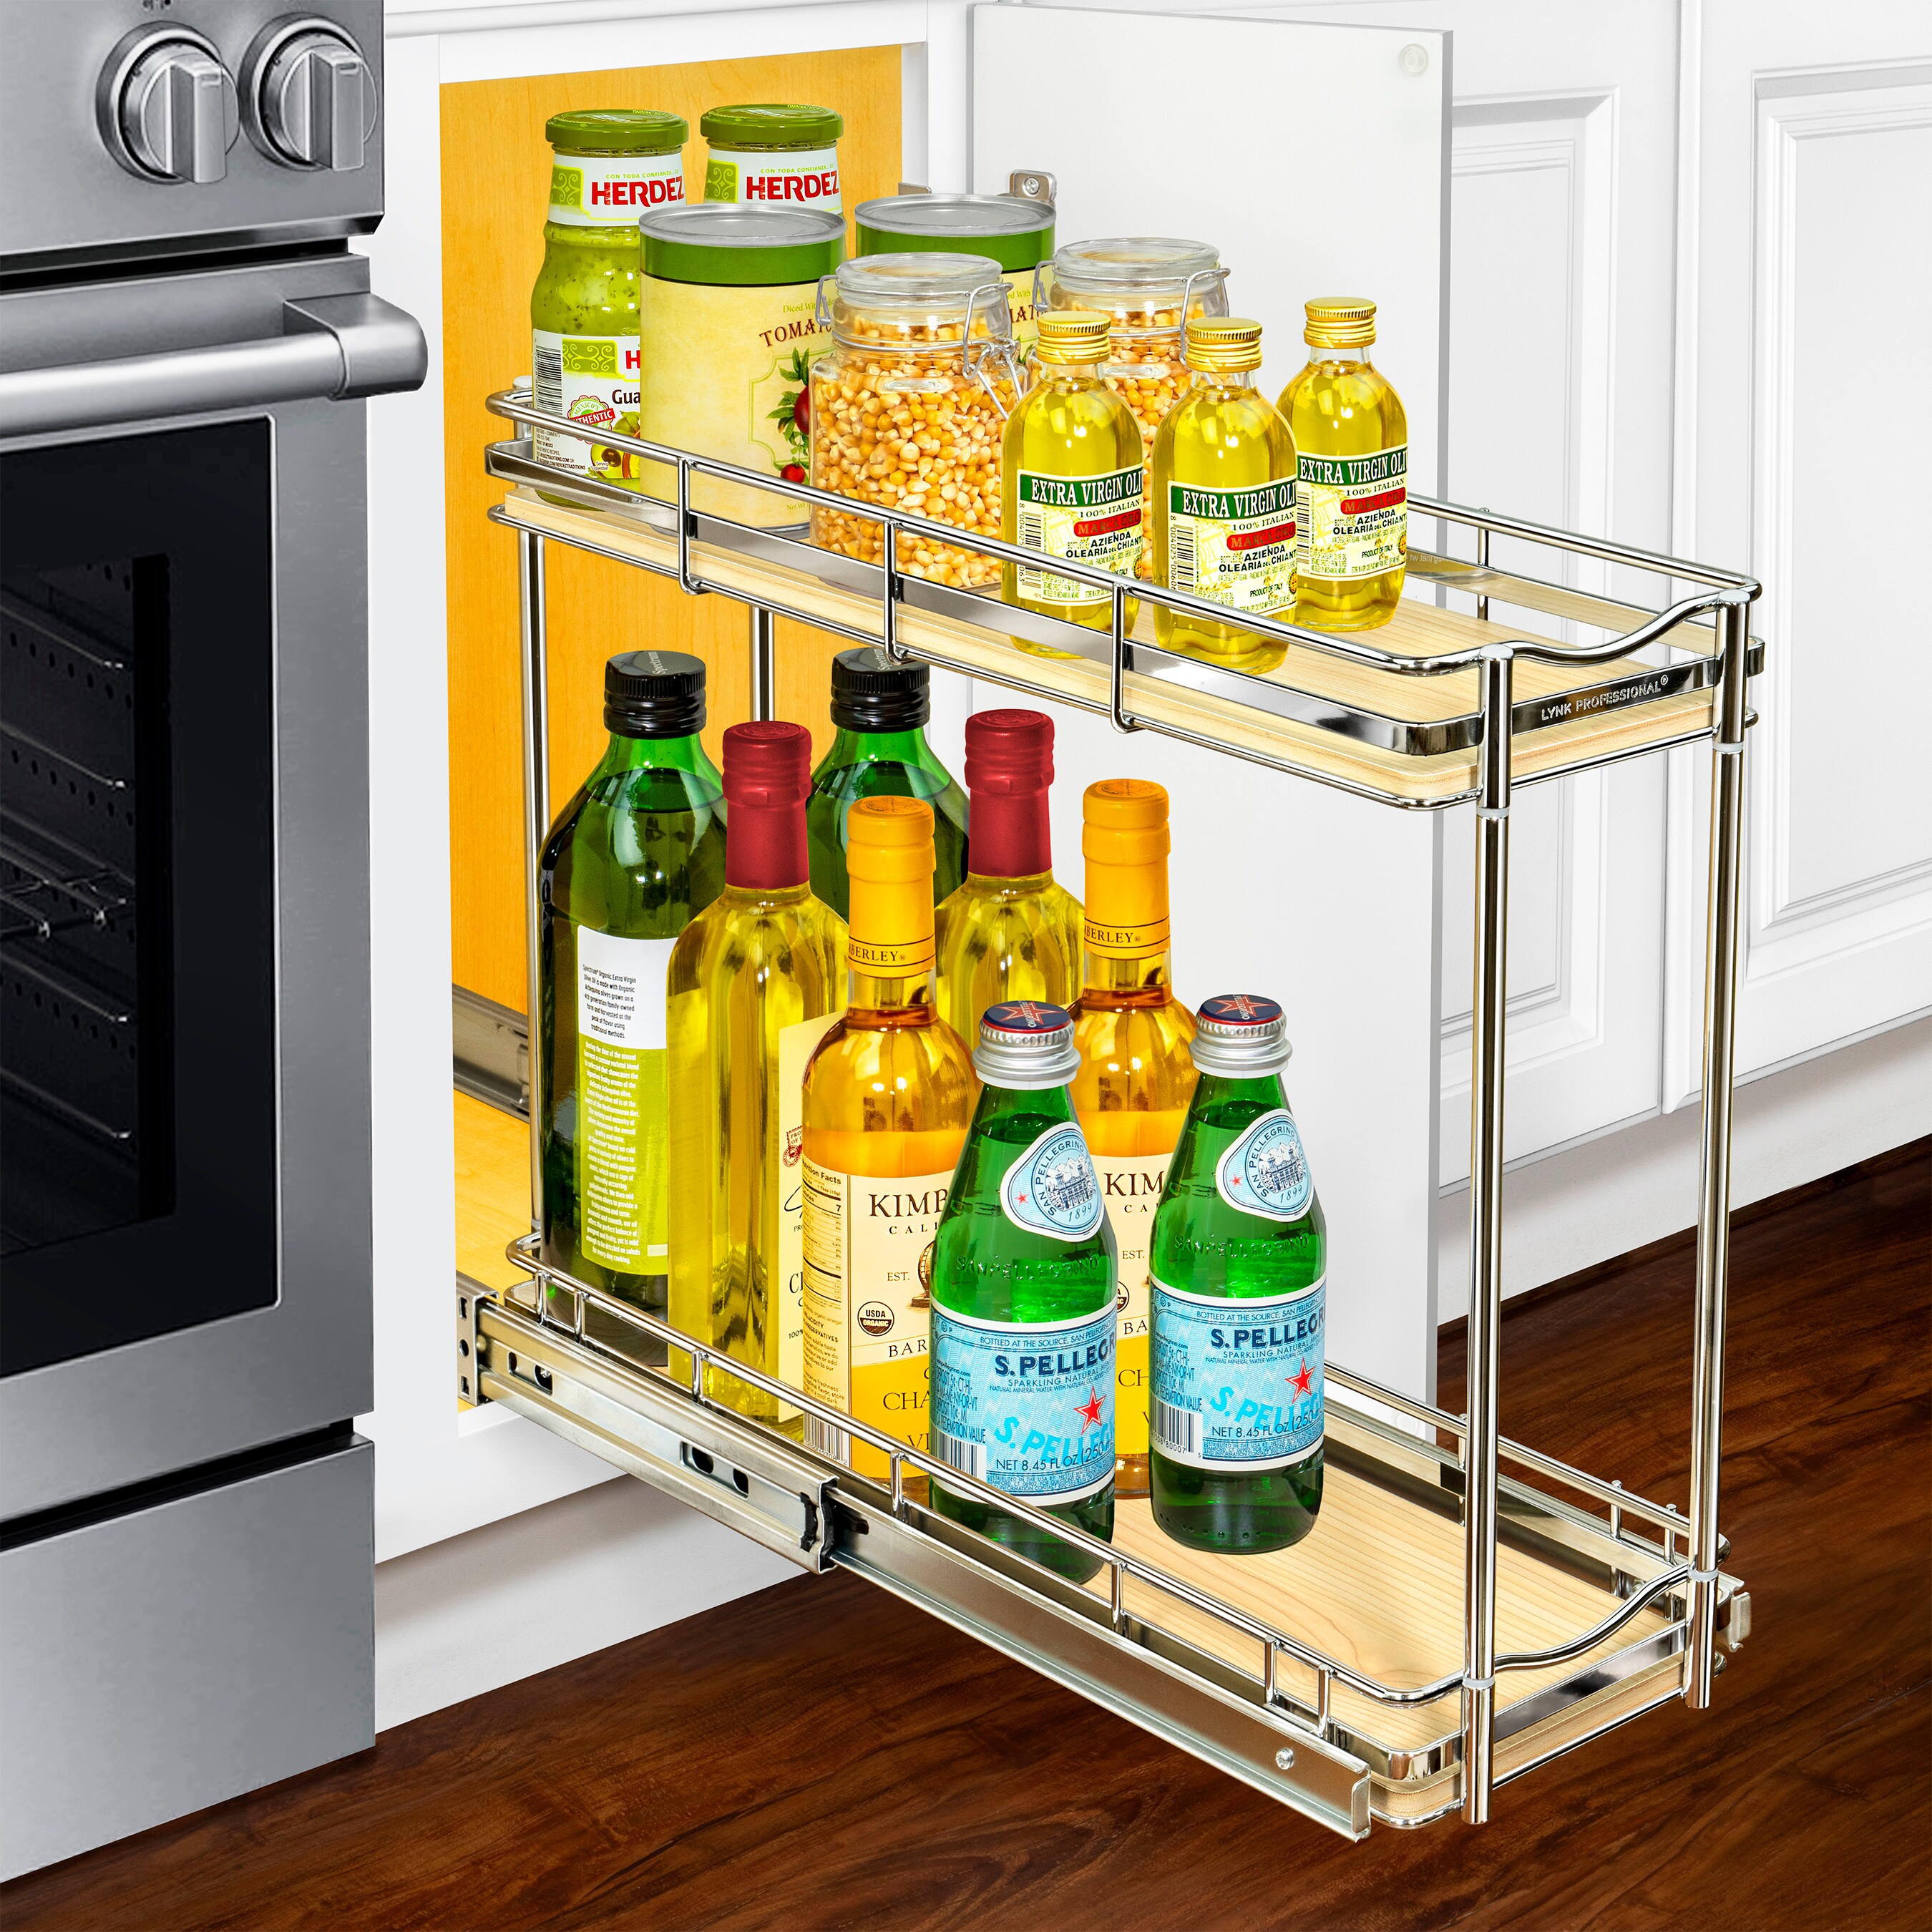 Lynk Slide Out Under Sink Two-Tier Organizer